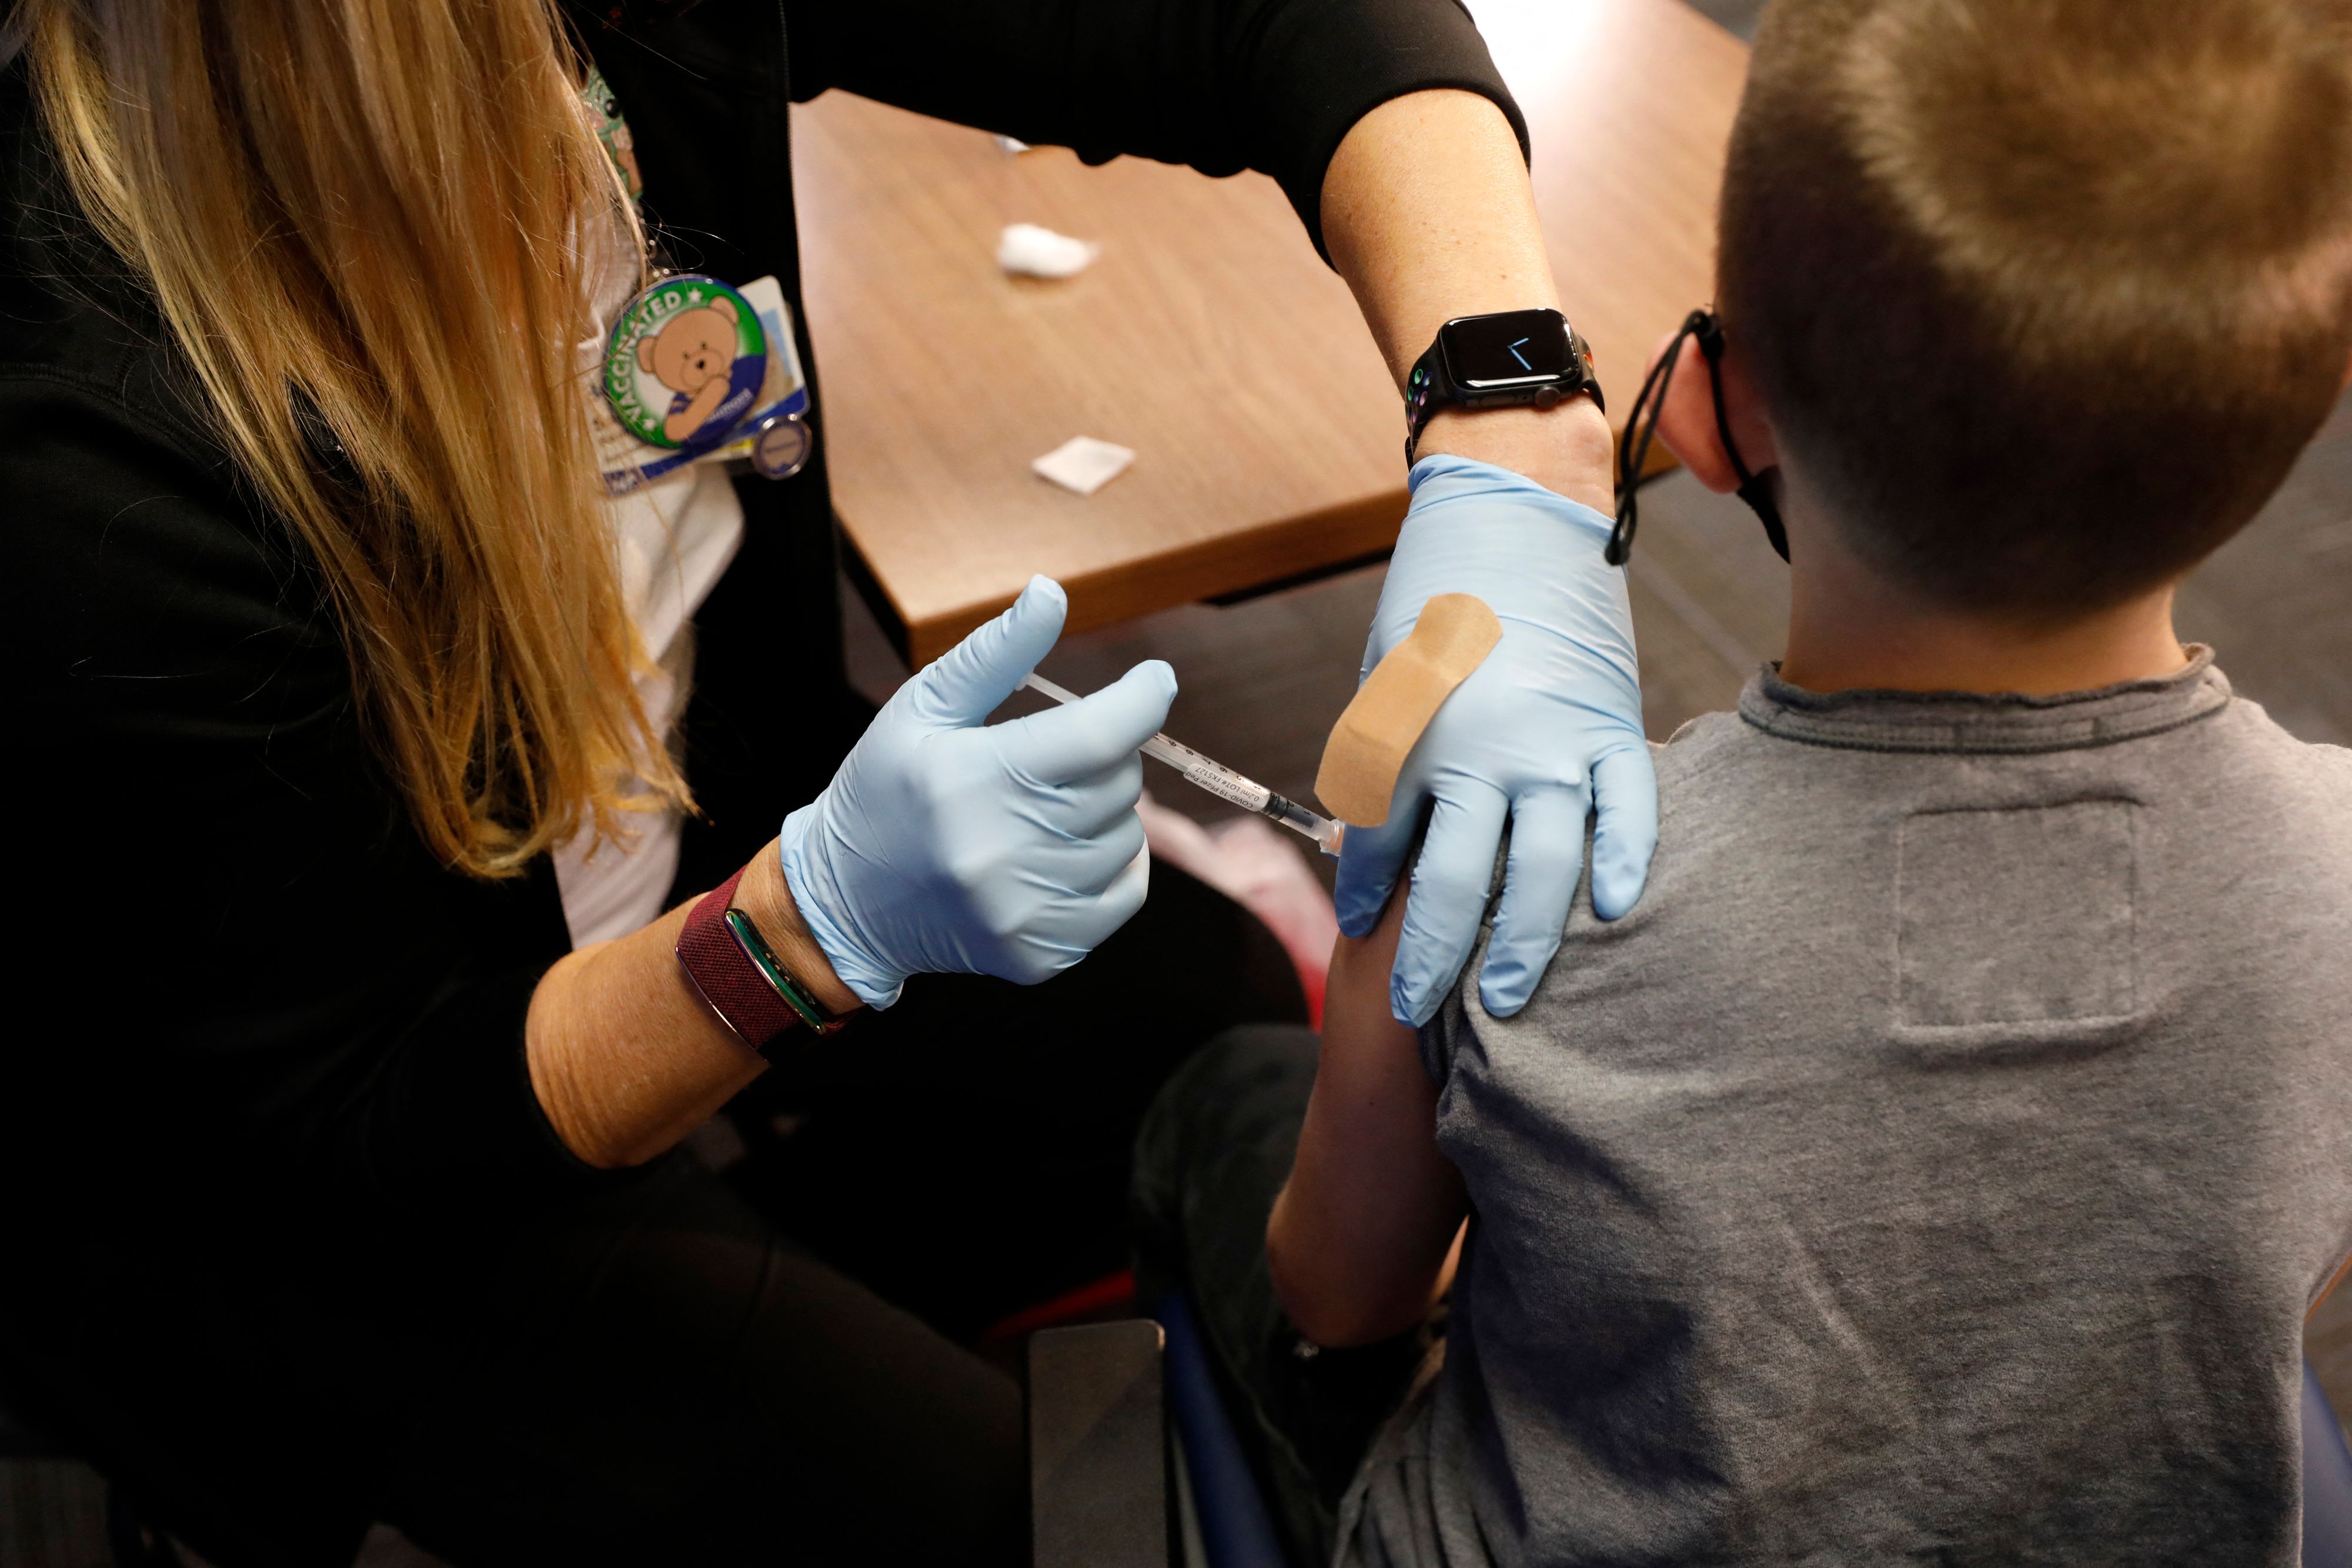 Lawyers Prepare to Sue Any State That Requires COVID-19 Vaccination to Attend School